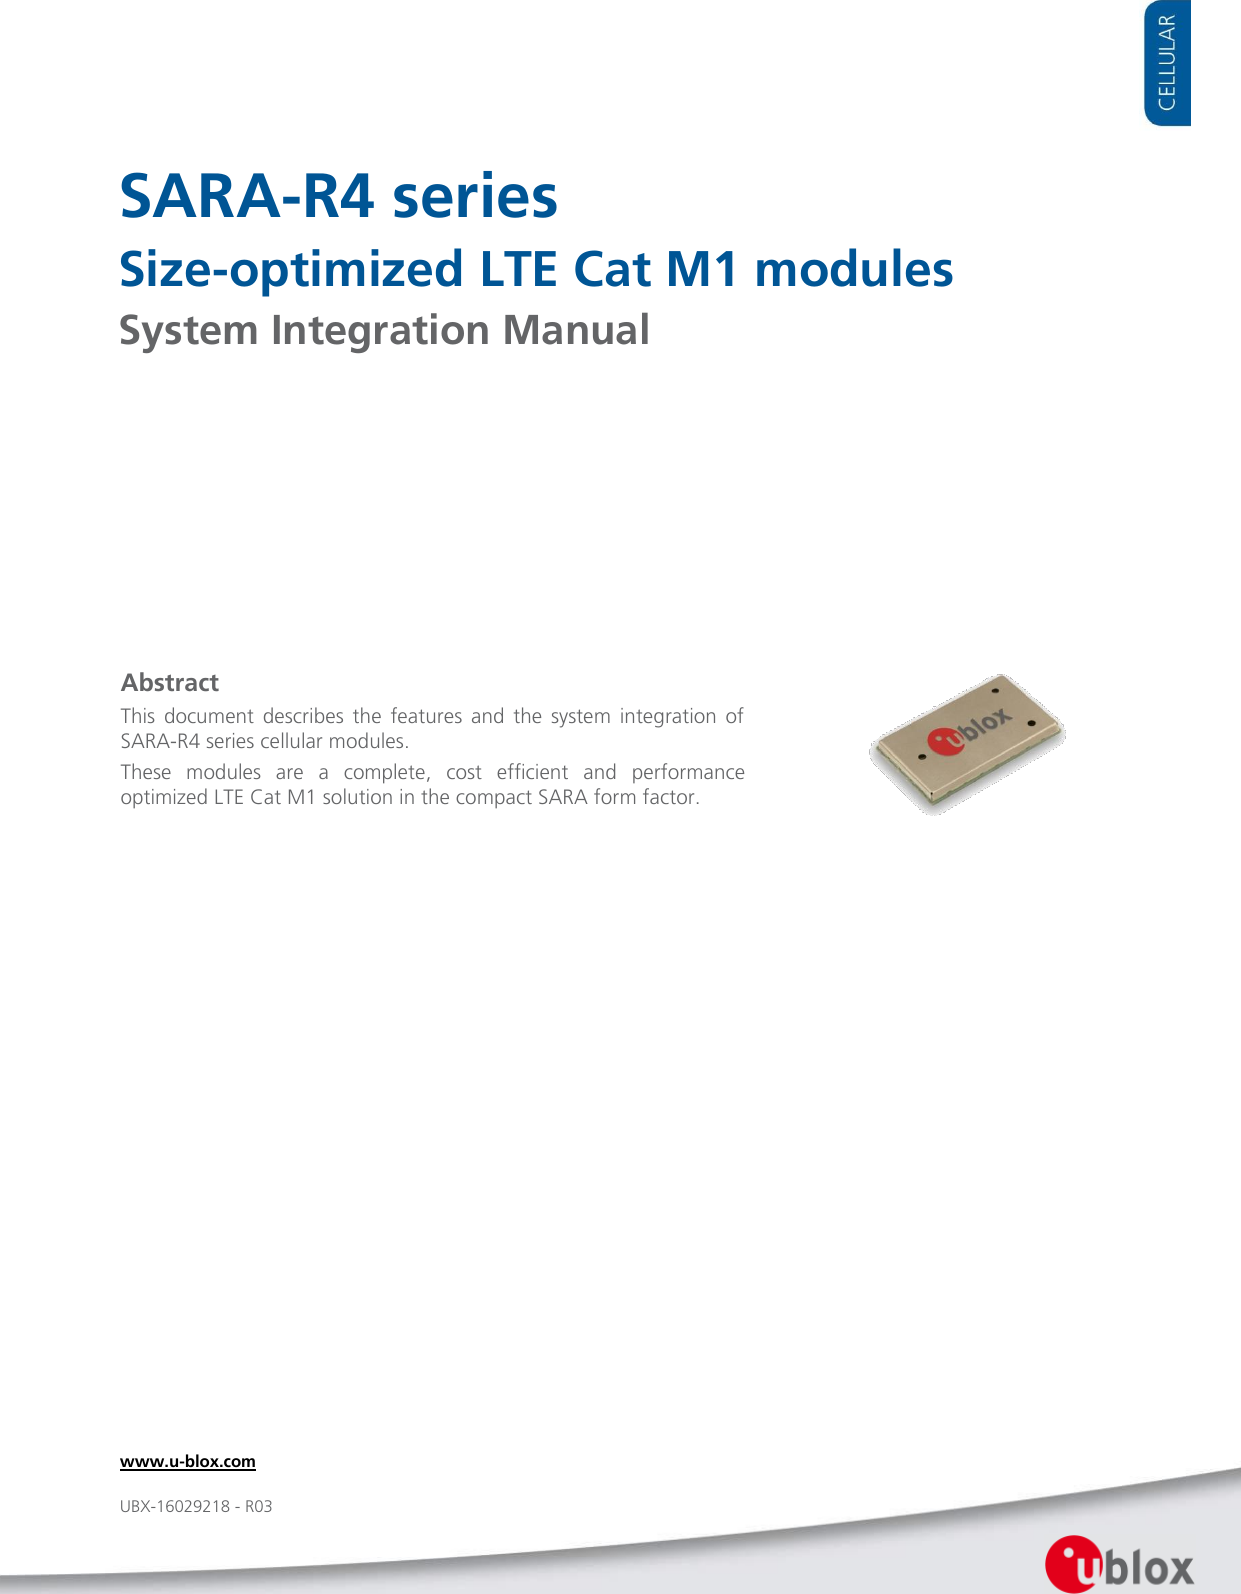     SARA-R4 series Size-optimized LTE Cat M1 modules System Integration Manual               Abstract This  document  describes  the  features  and  the  system  integration  of SARA-R4 series cellular modules. These  modules  are  a  complete,  cost  efficient  and  performance optimized LTE Cat M1 solution in the compact SARA form factor. www.u-blox.com UBX-16029218 - R03 